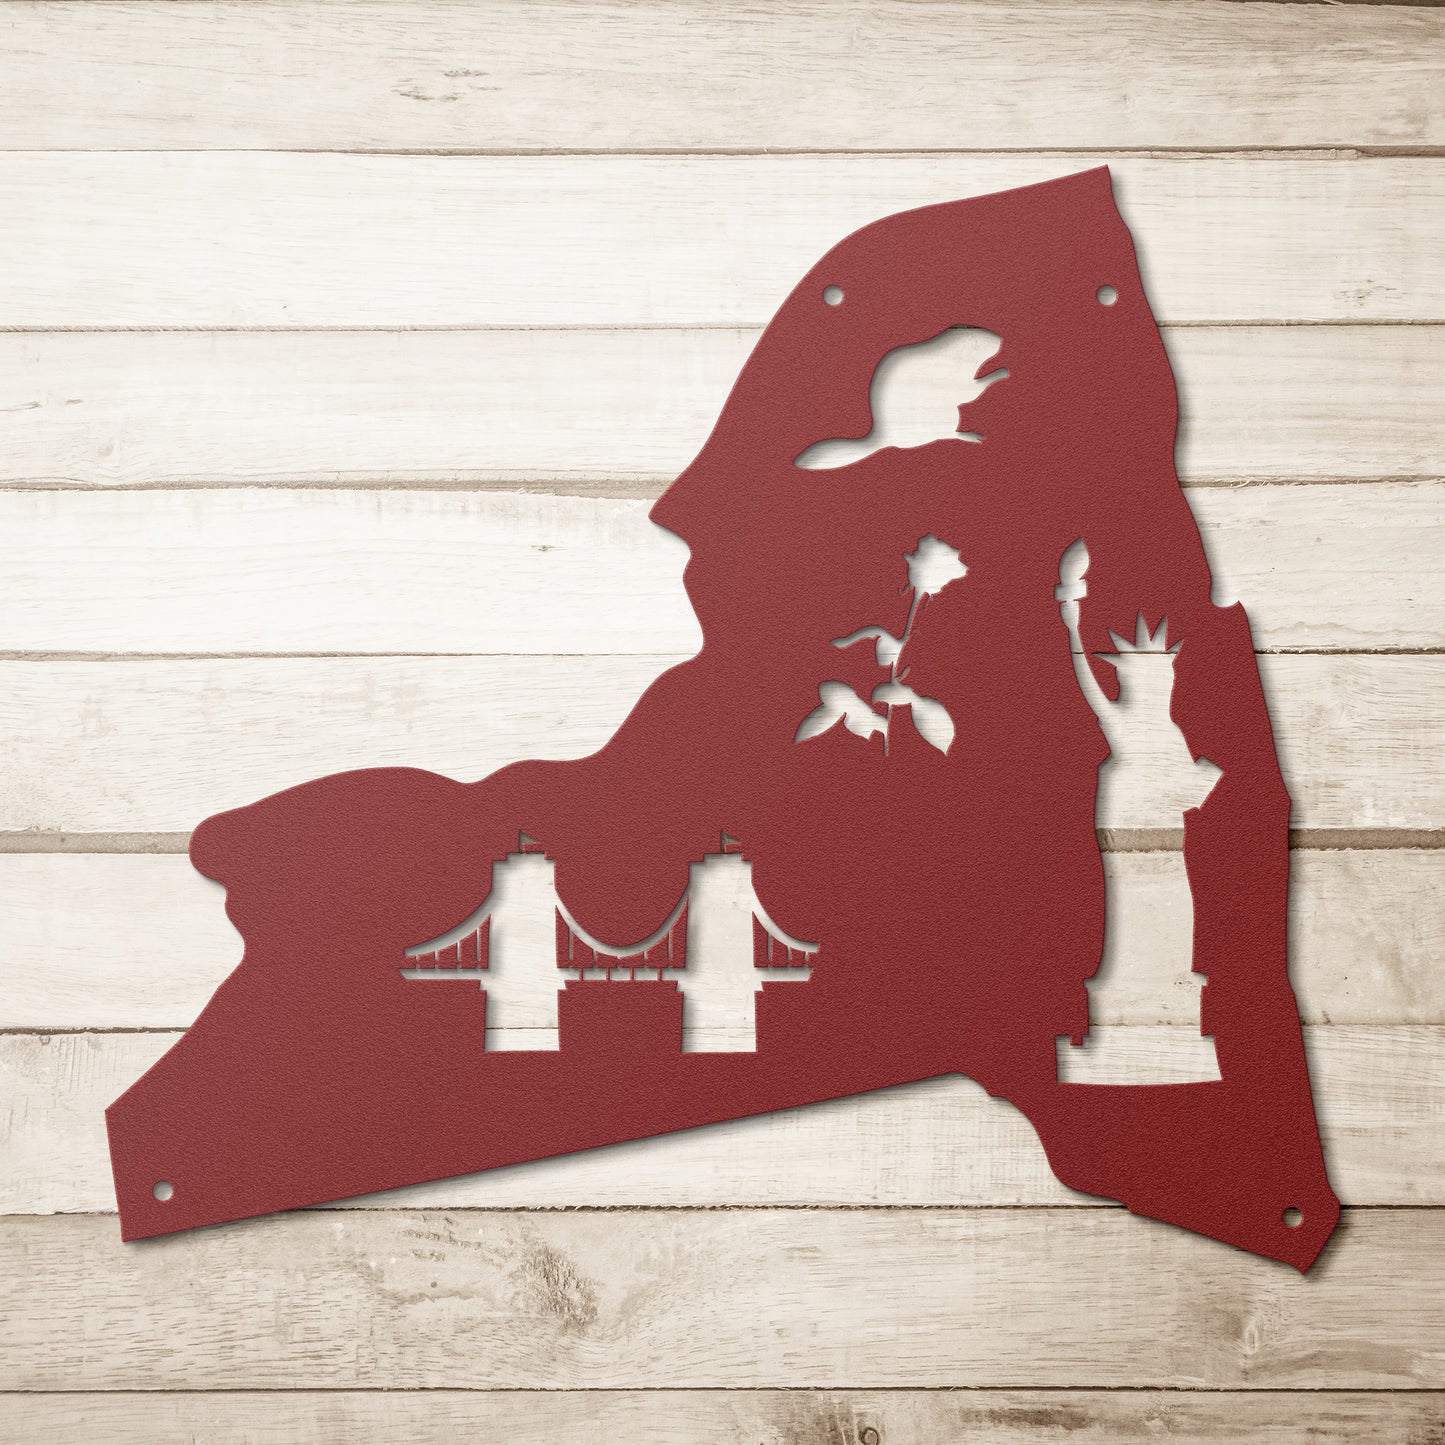 The Empire State New York Metal Art